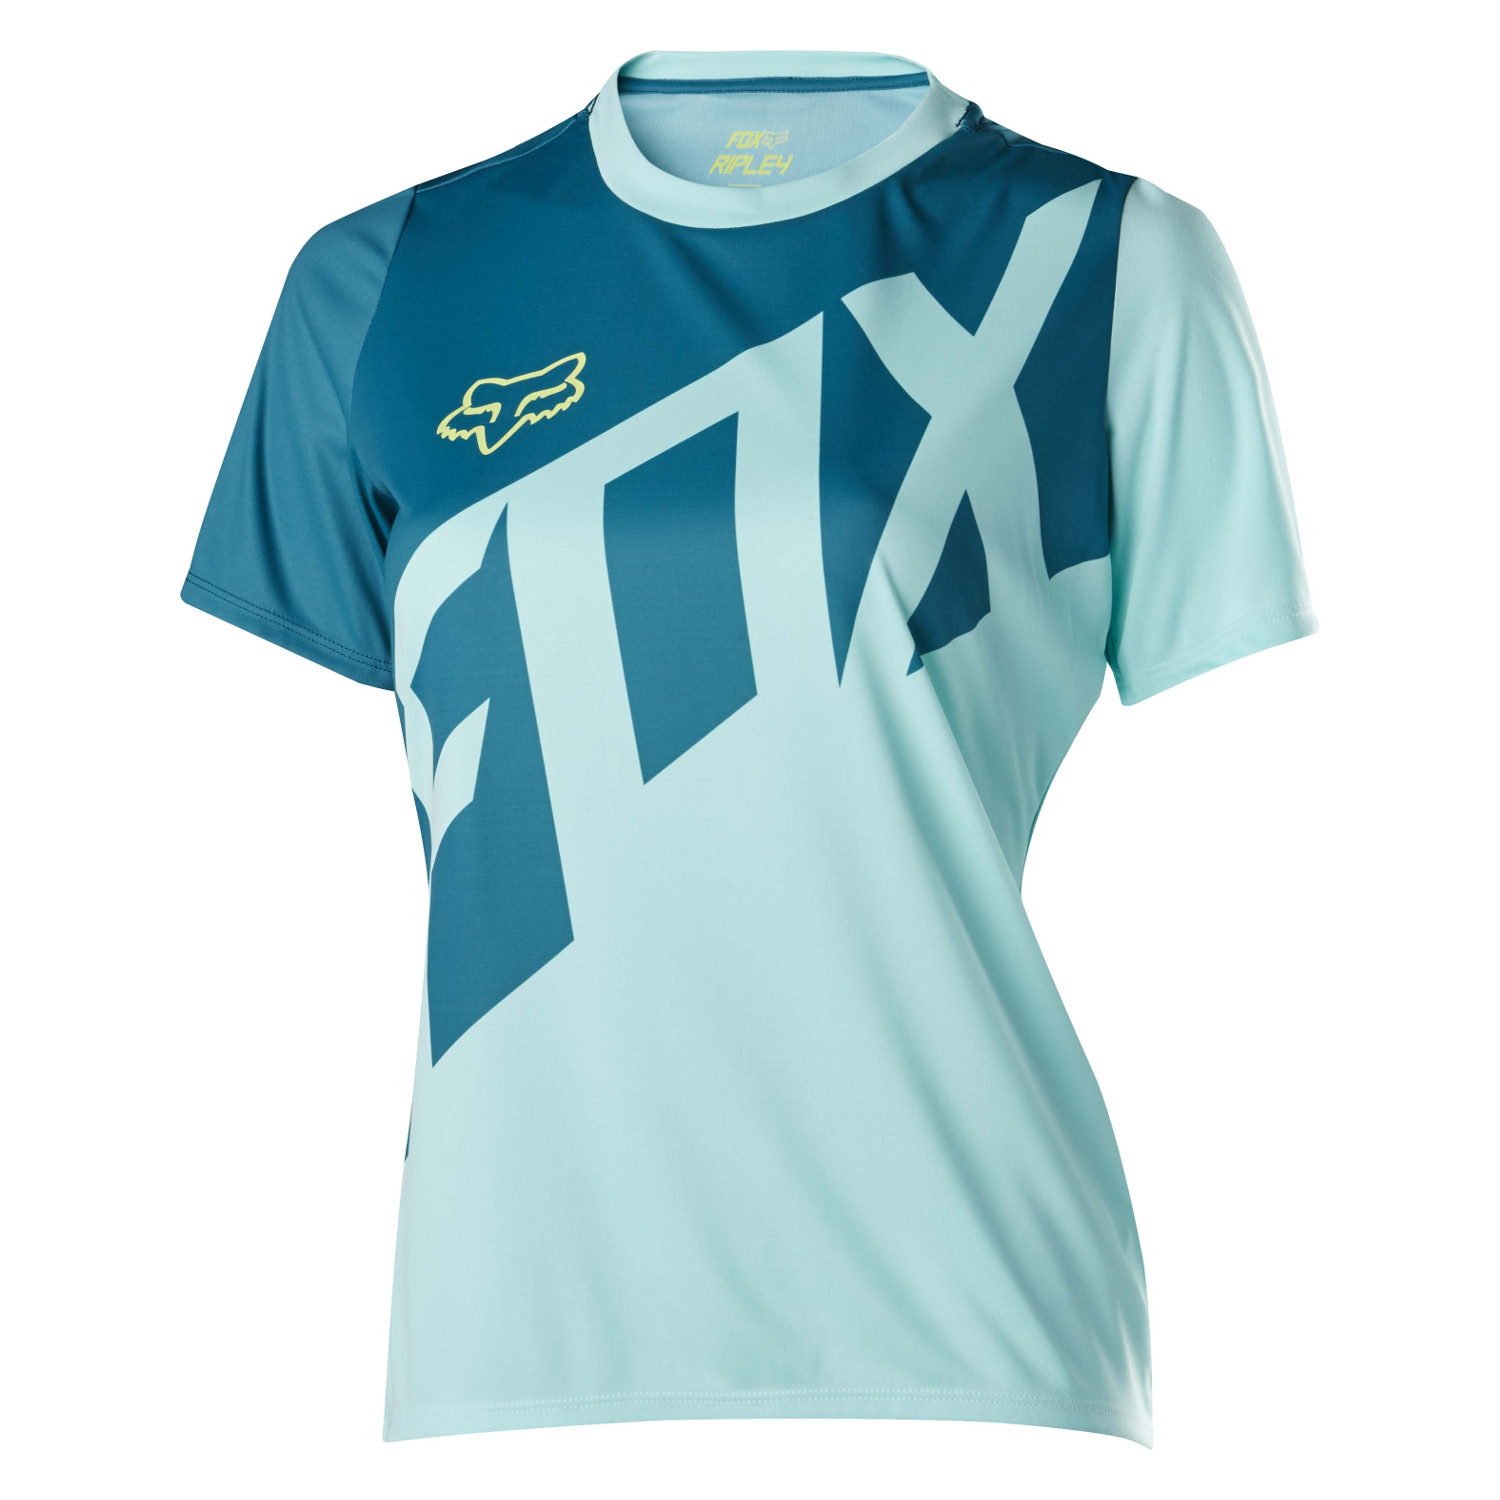 Fox Femme Maillot VTT Manches Courtes Ripley Ice Blue